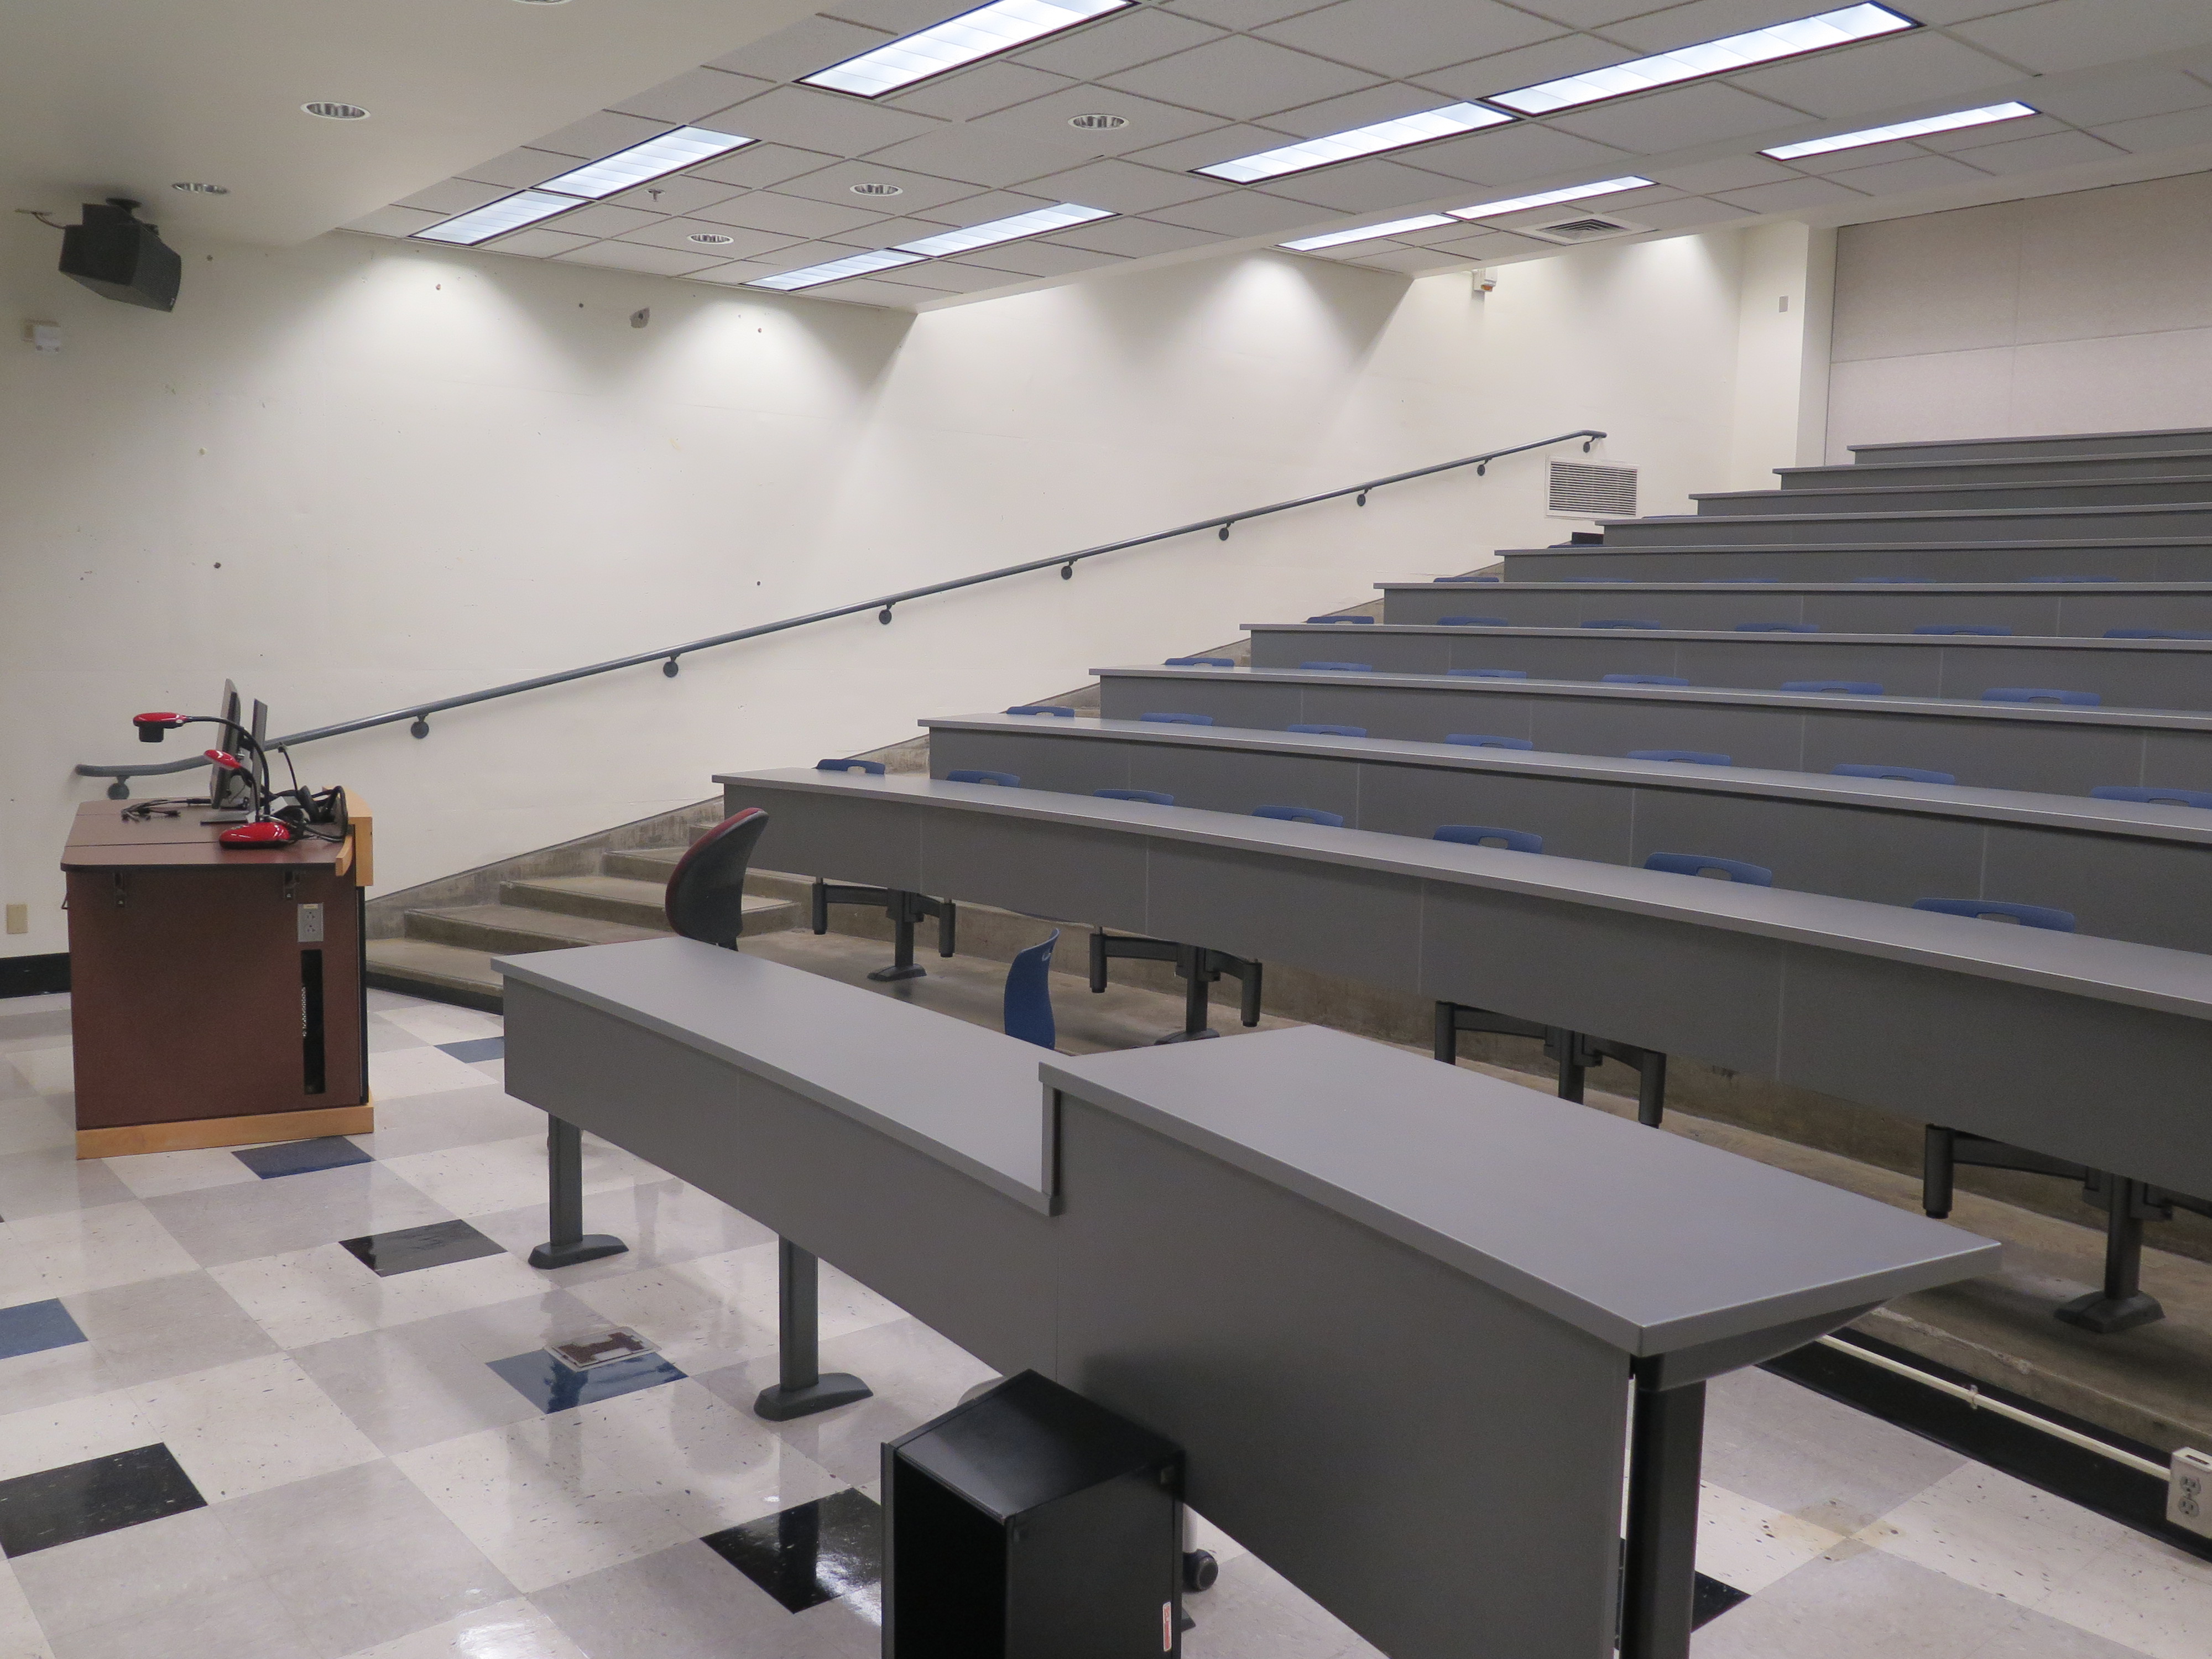 Room Consists of hard floors, Stationary rows of tables and chairs, a white board and podium are both located at the front of the room. this room also uses a Rear Screen projector, it is the large Gray surface next to the white board